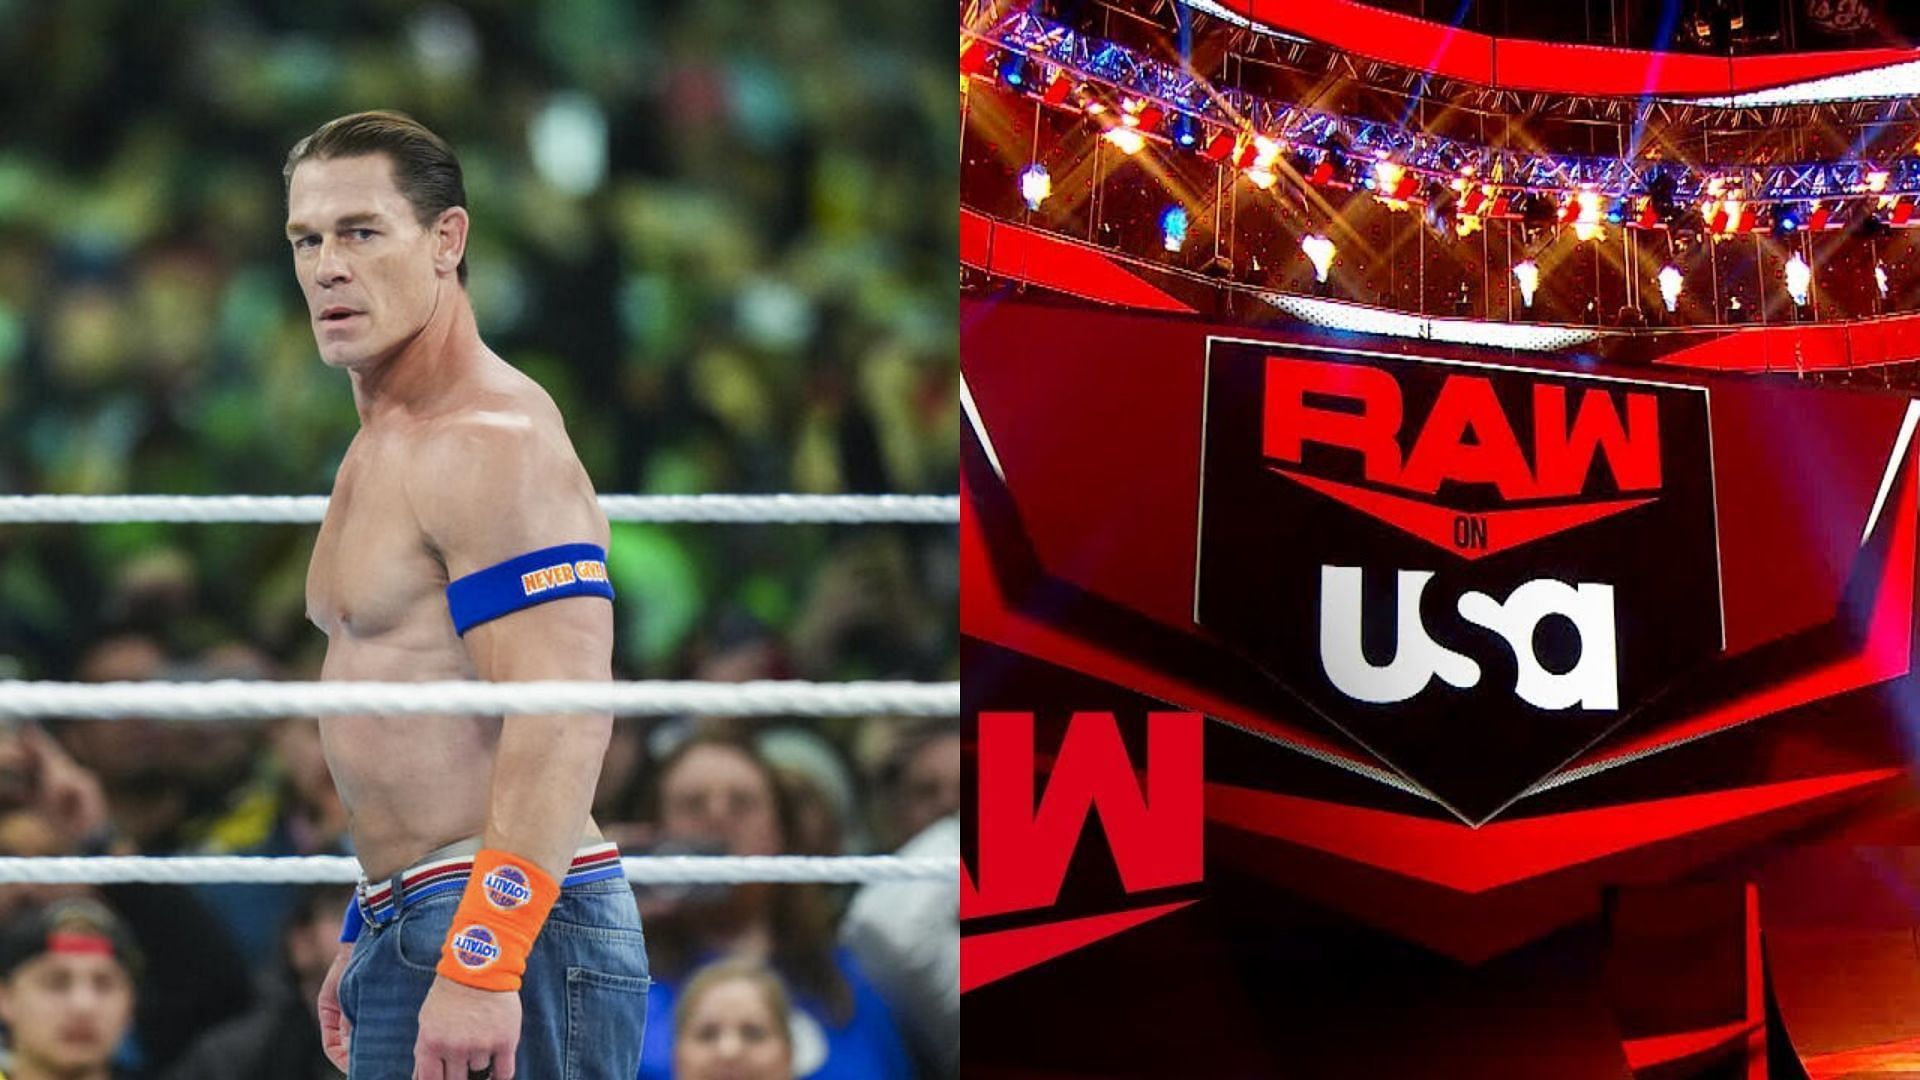 John Cena teamed up with former rivals on WWE RAW